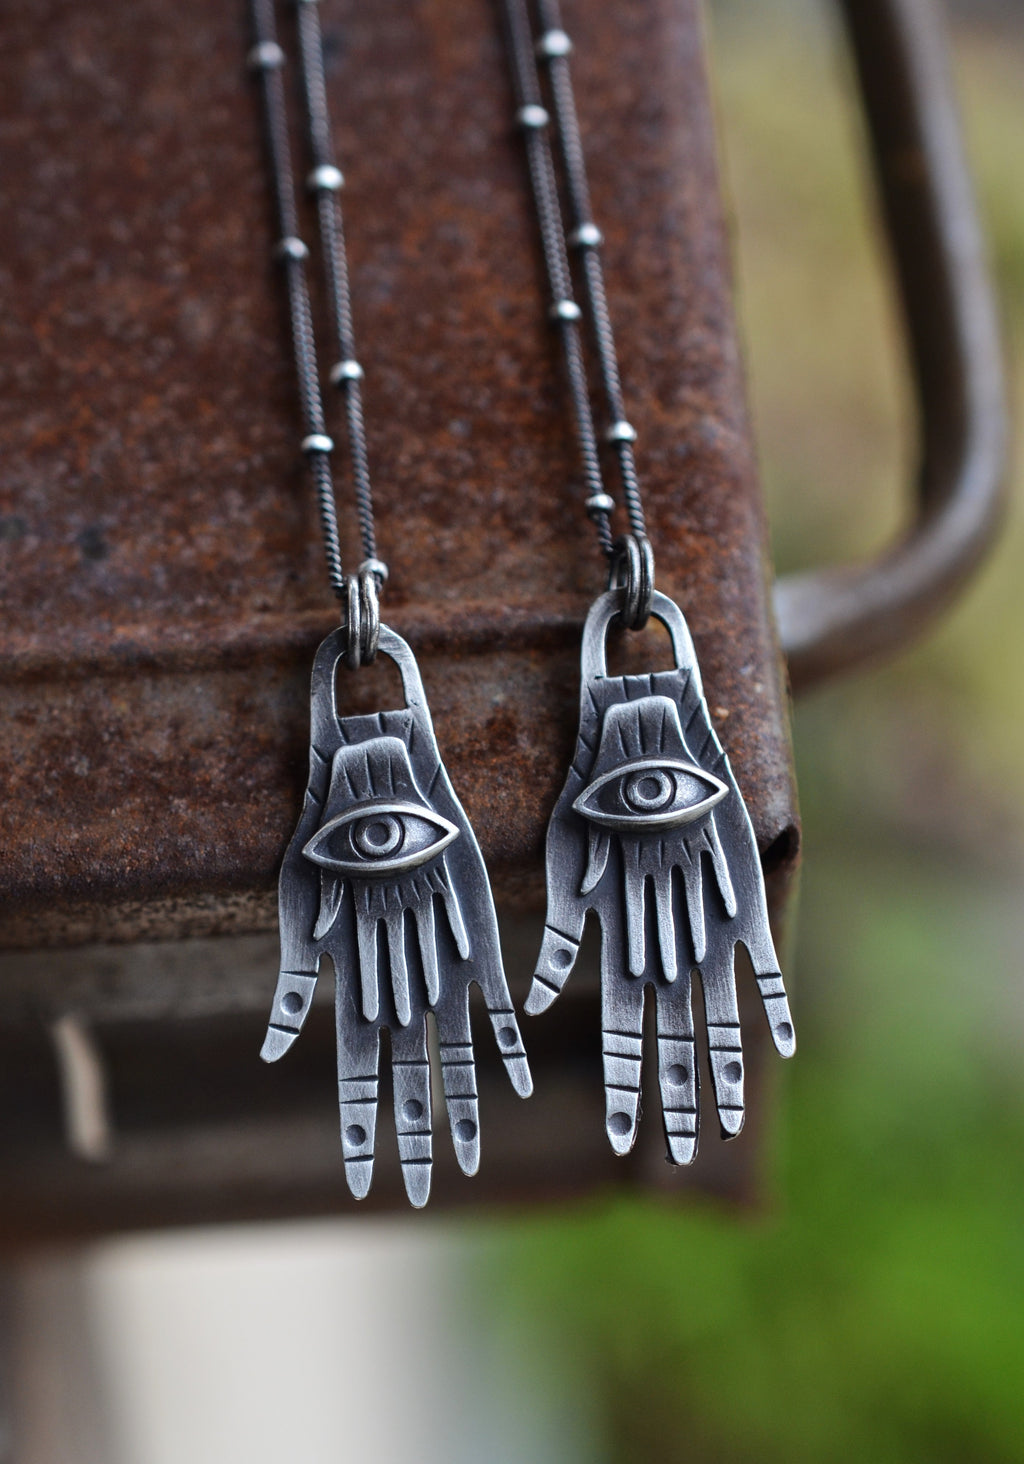 Twin Hands Third Eye Charm - 16" or 18" Chain Included